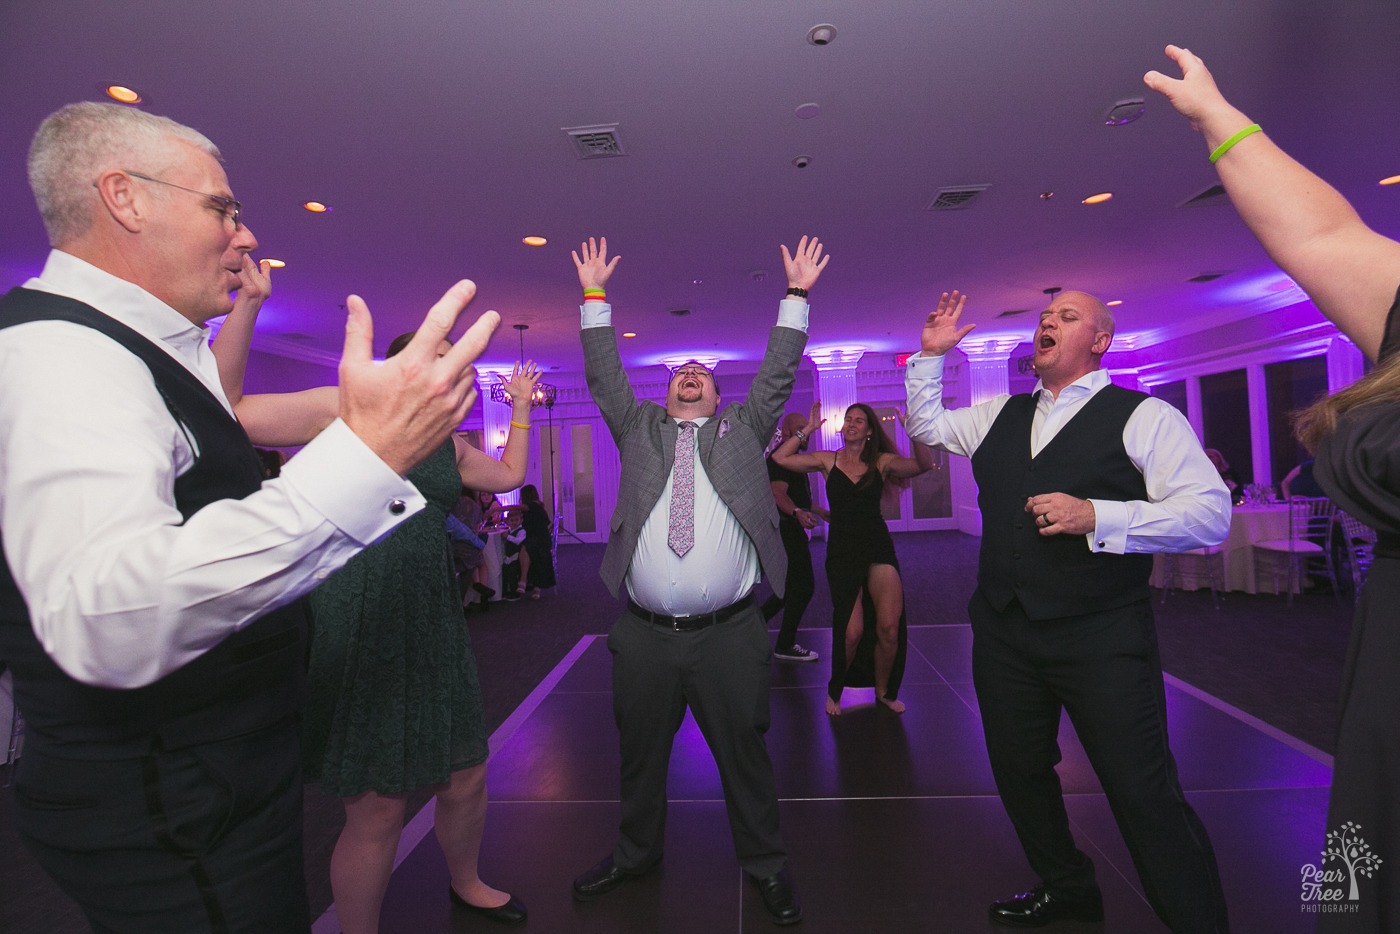 Groom with friends and family singing and raising hands on the dance floor